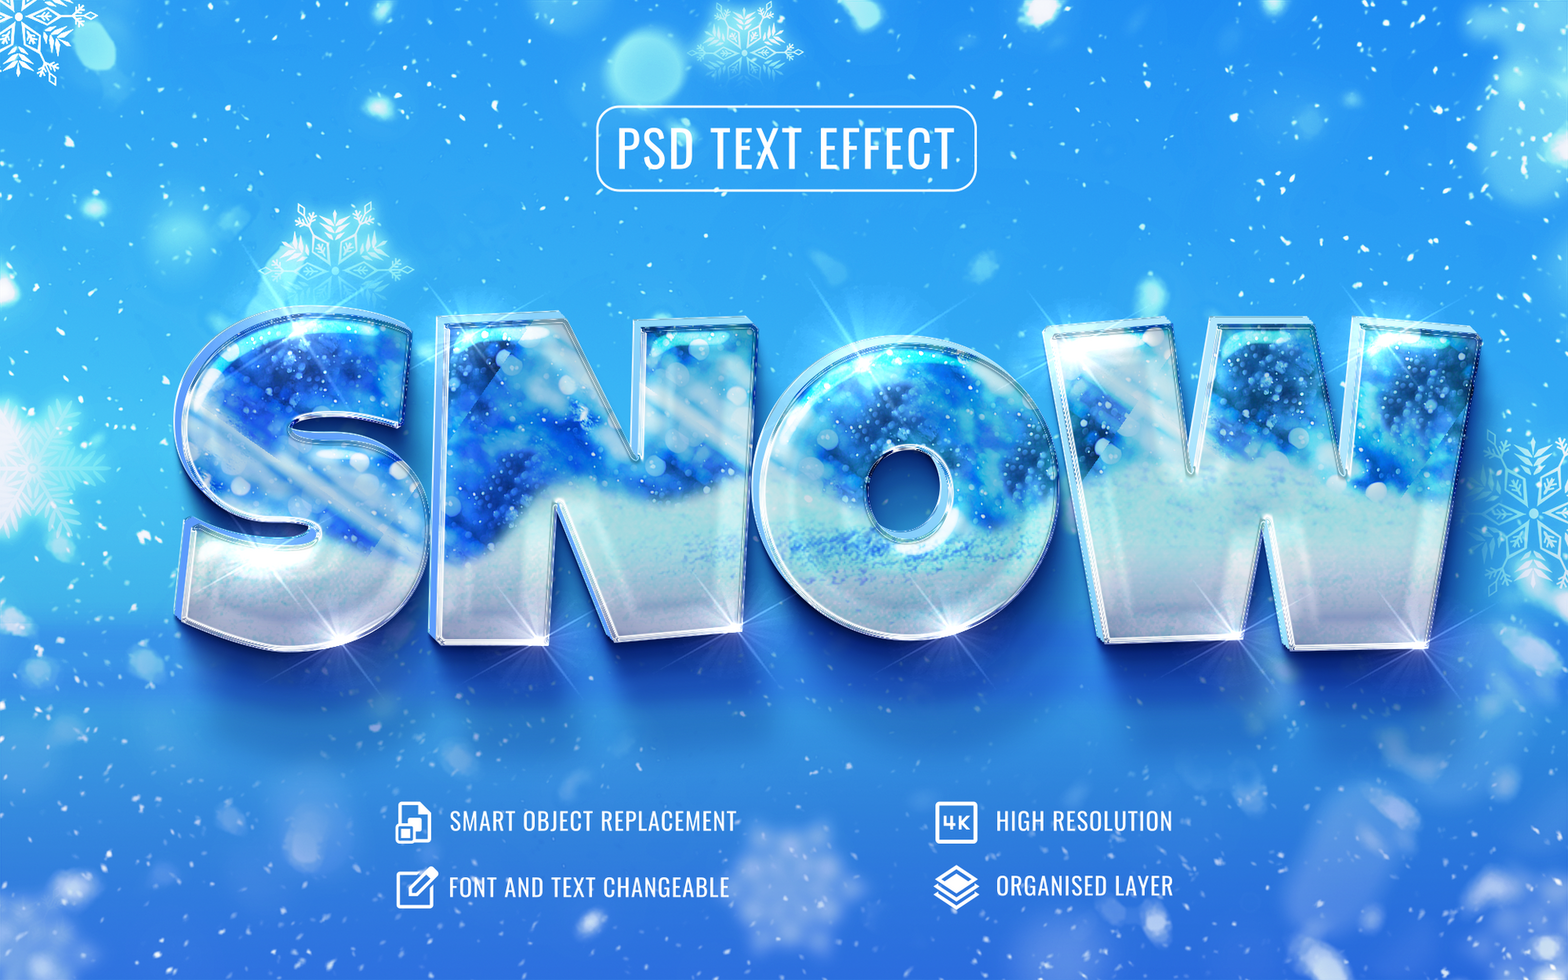 shiny snow text effect with snowflakes background psd